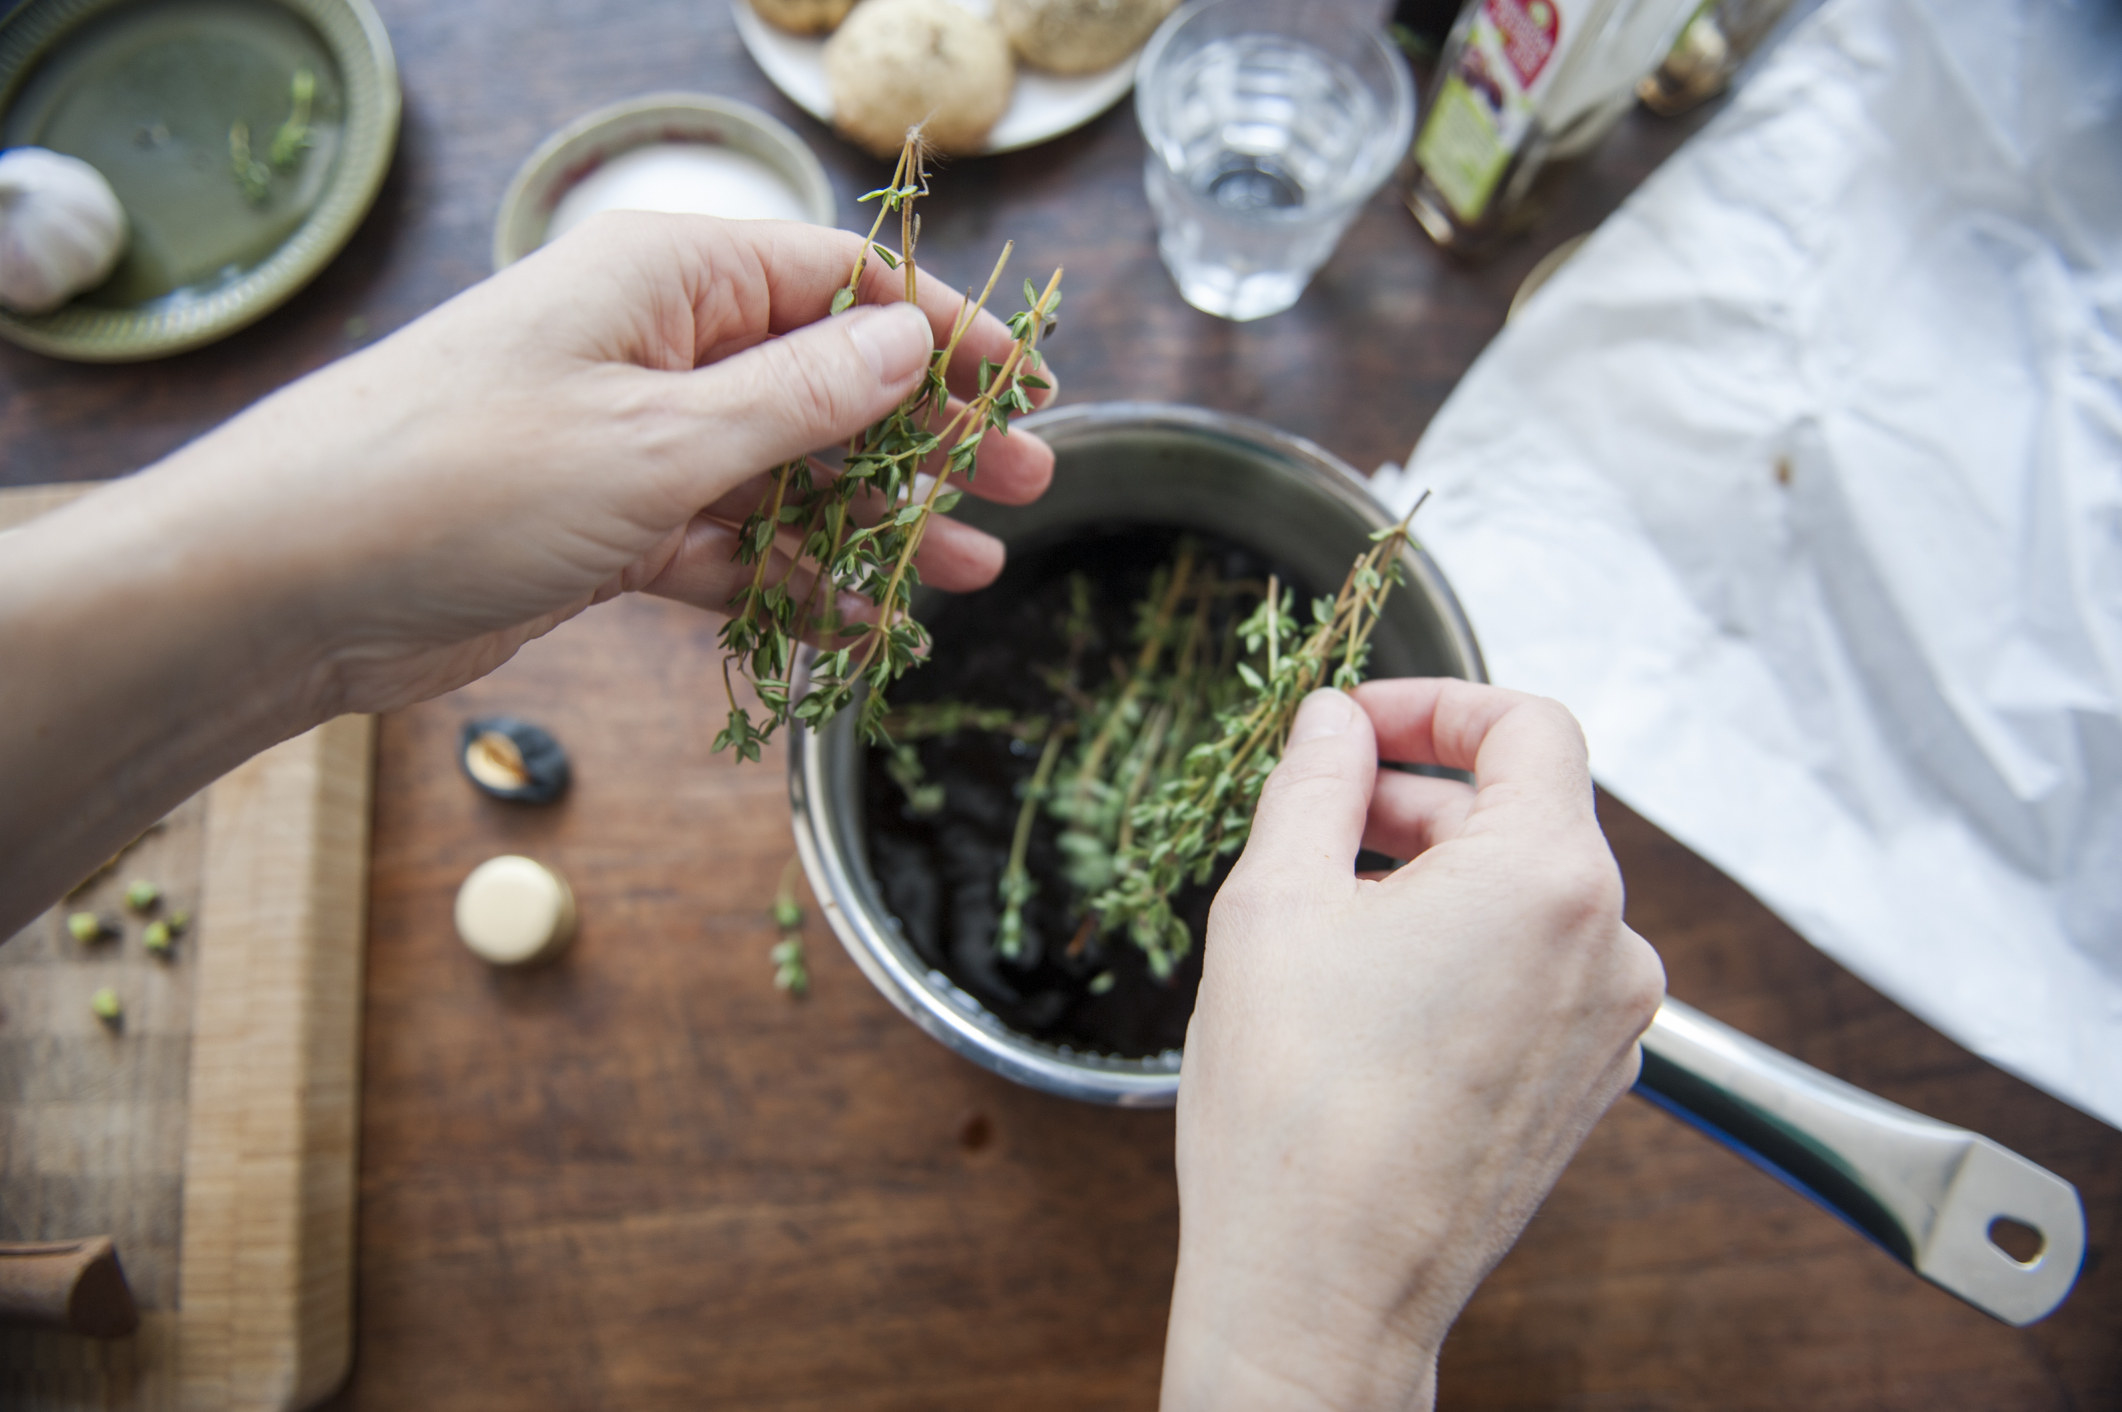 Putting thyme into a bowl.